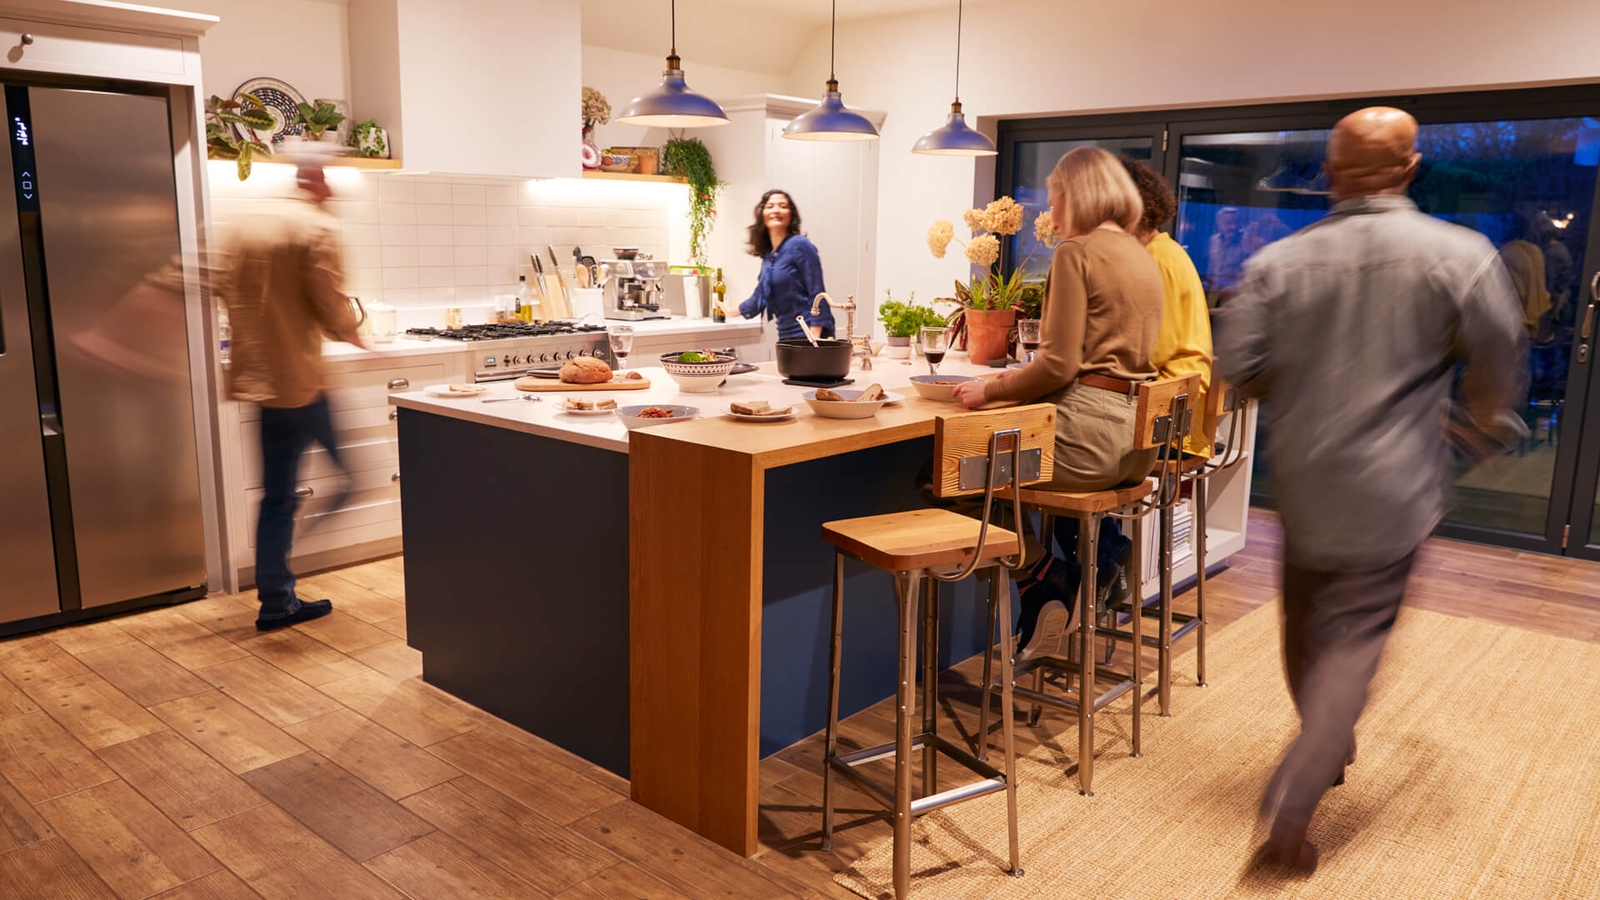 A dinner party in a kitchen with wooden countertops